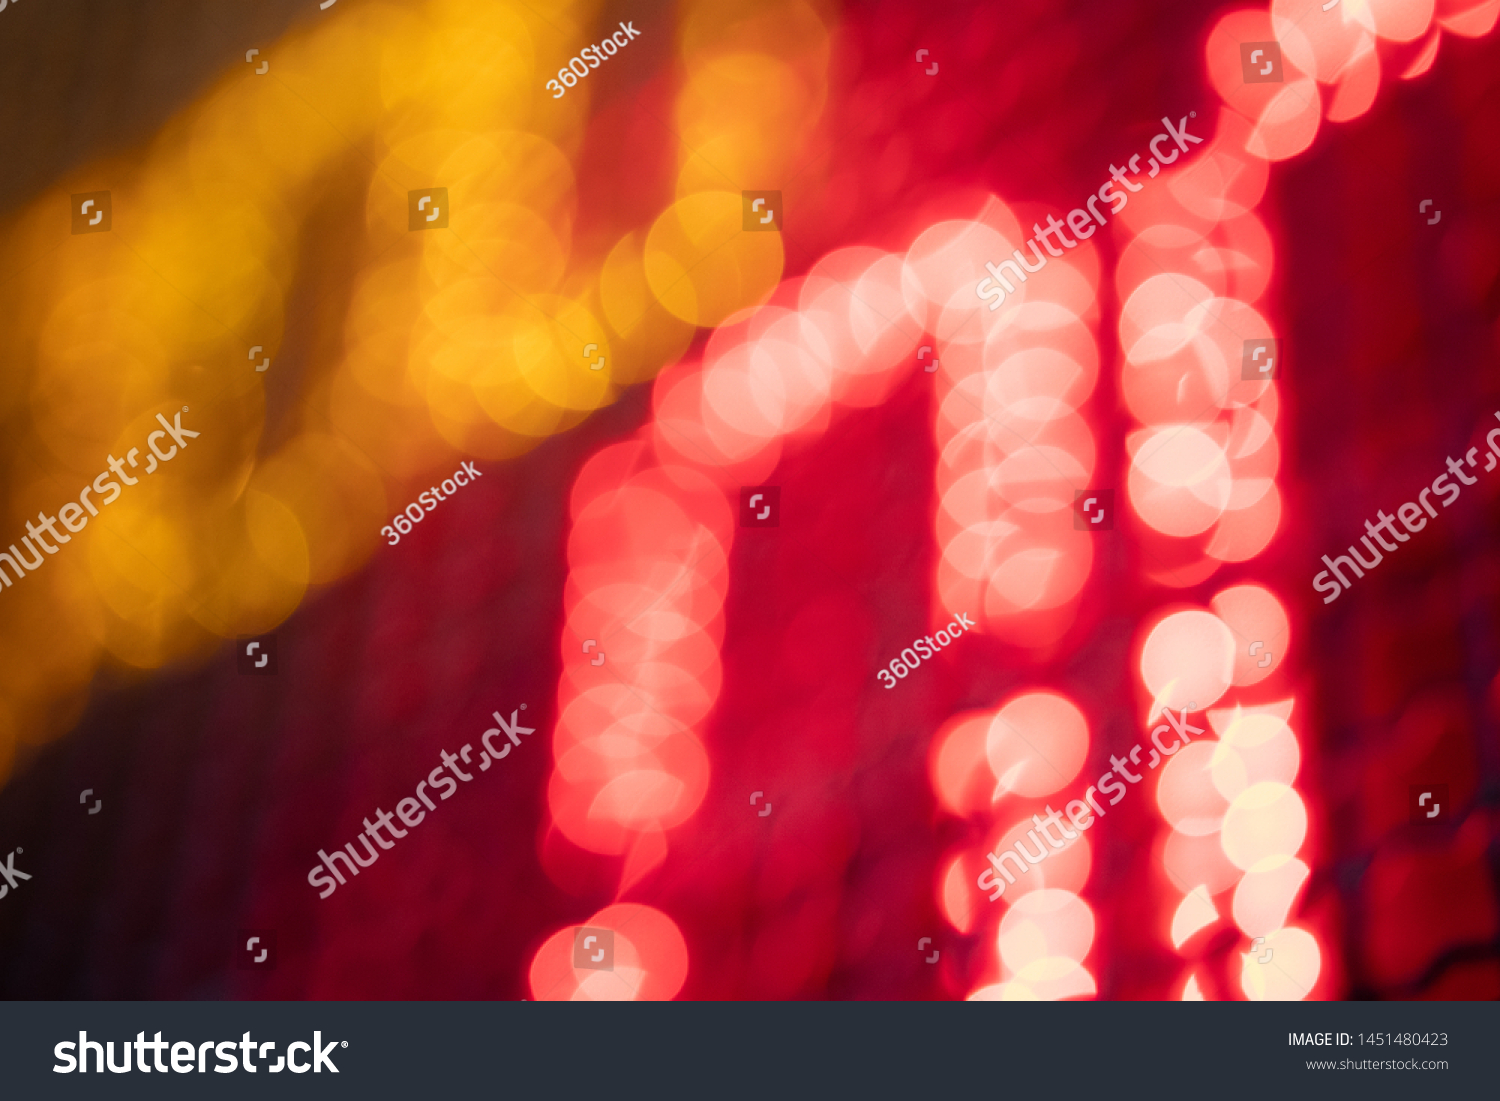 Out-of-focus effect, orange and red LED lights from the scoreboard. Suitable to be a background image. #1451480423